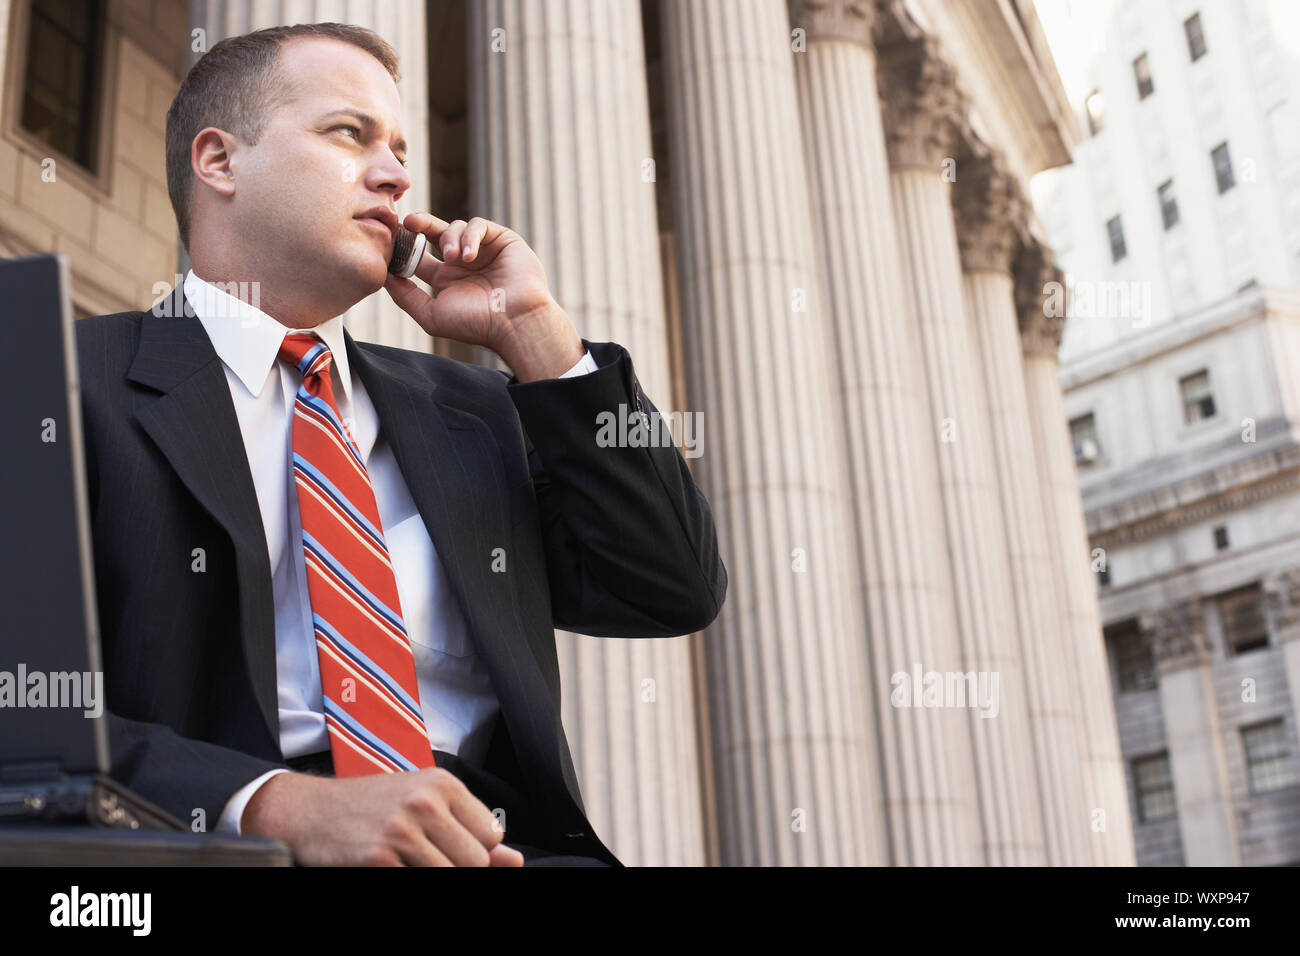 Confident mature businessman using cell phone in front of building Stock Photo